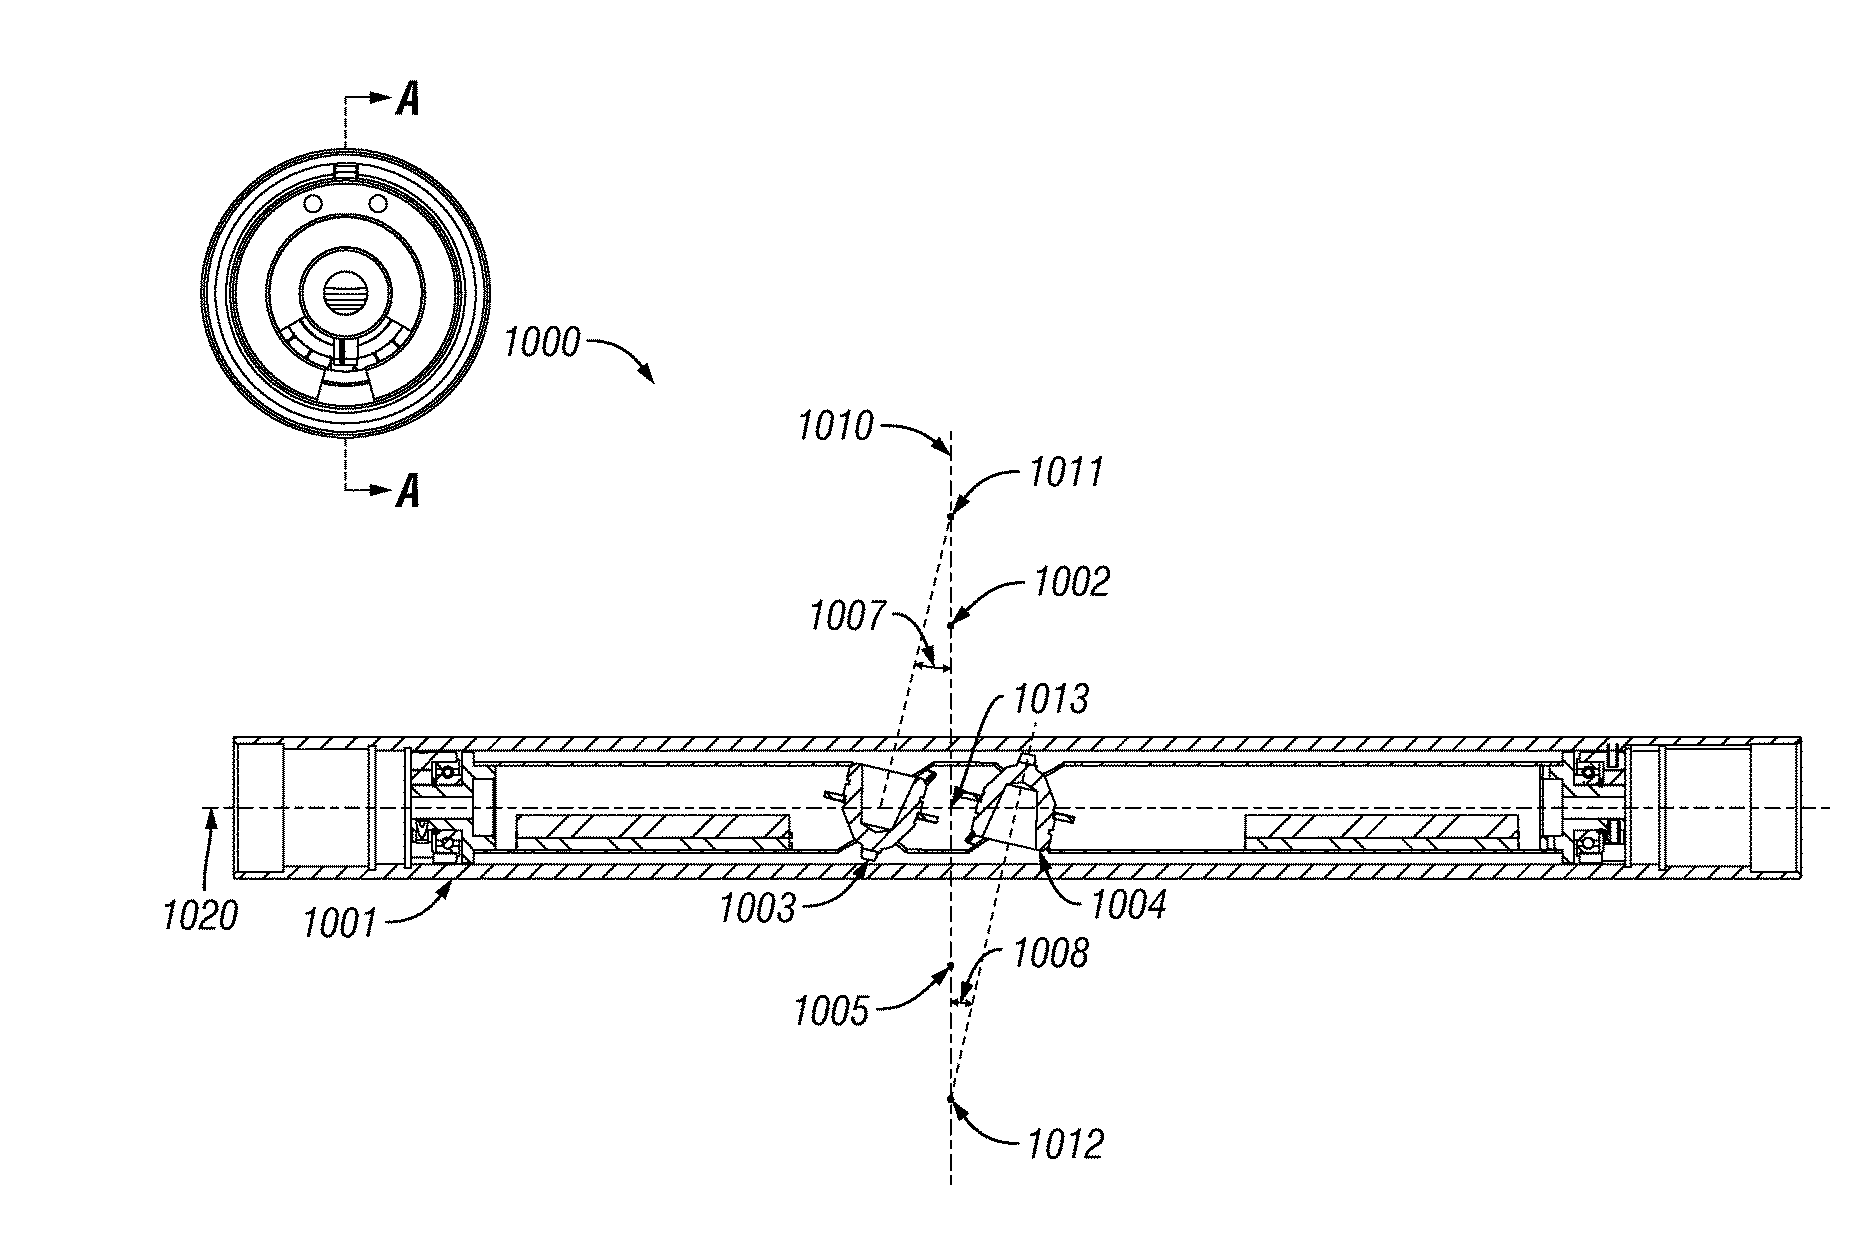 Limited entry phased perforating gun system and method